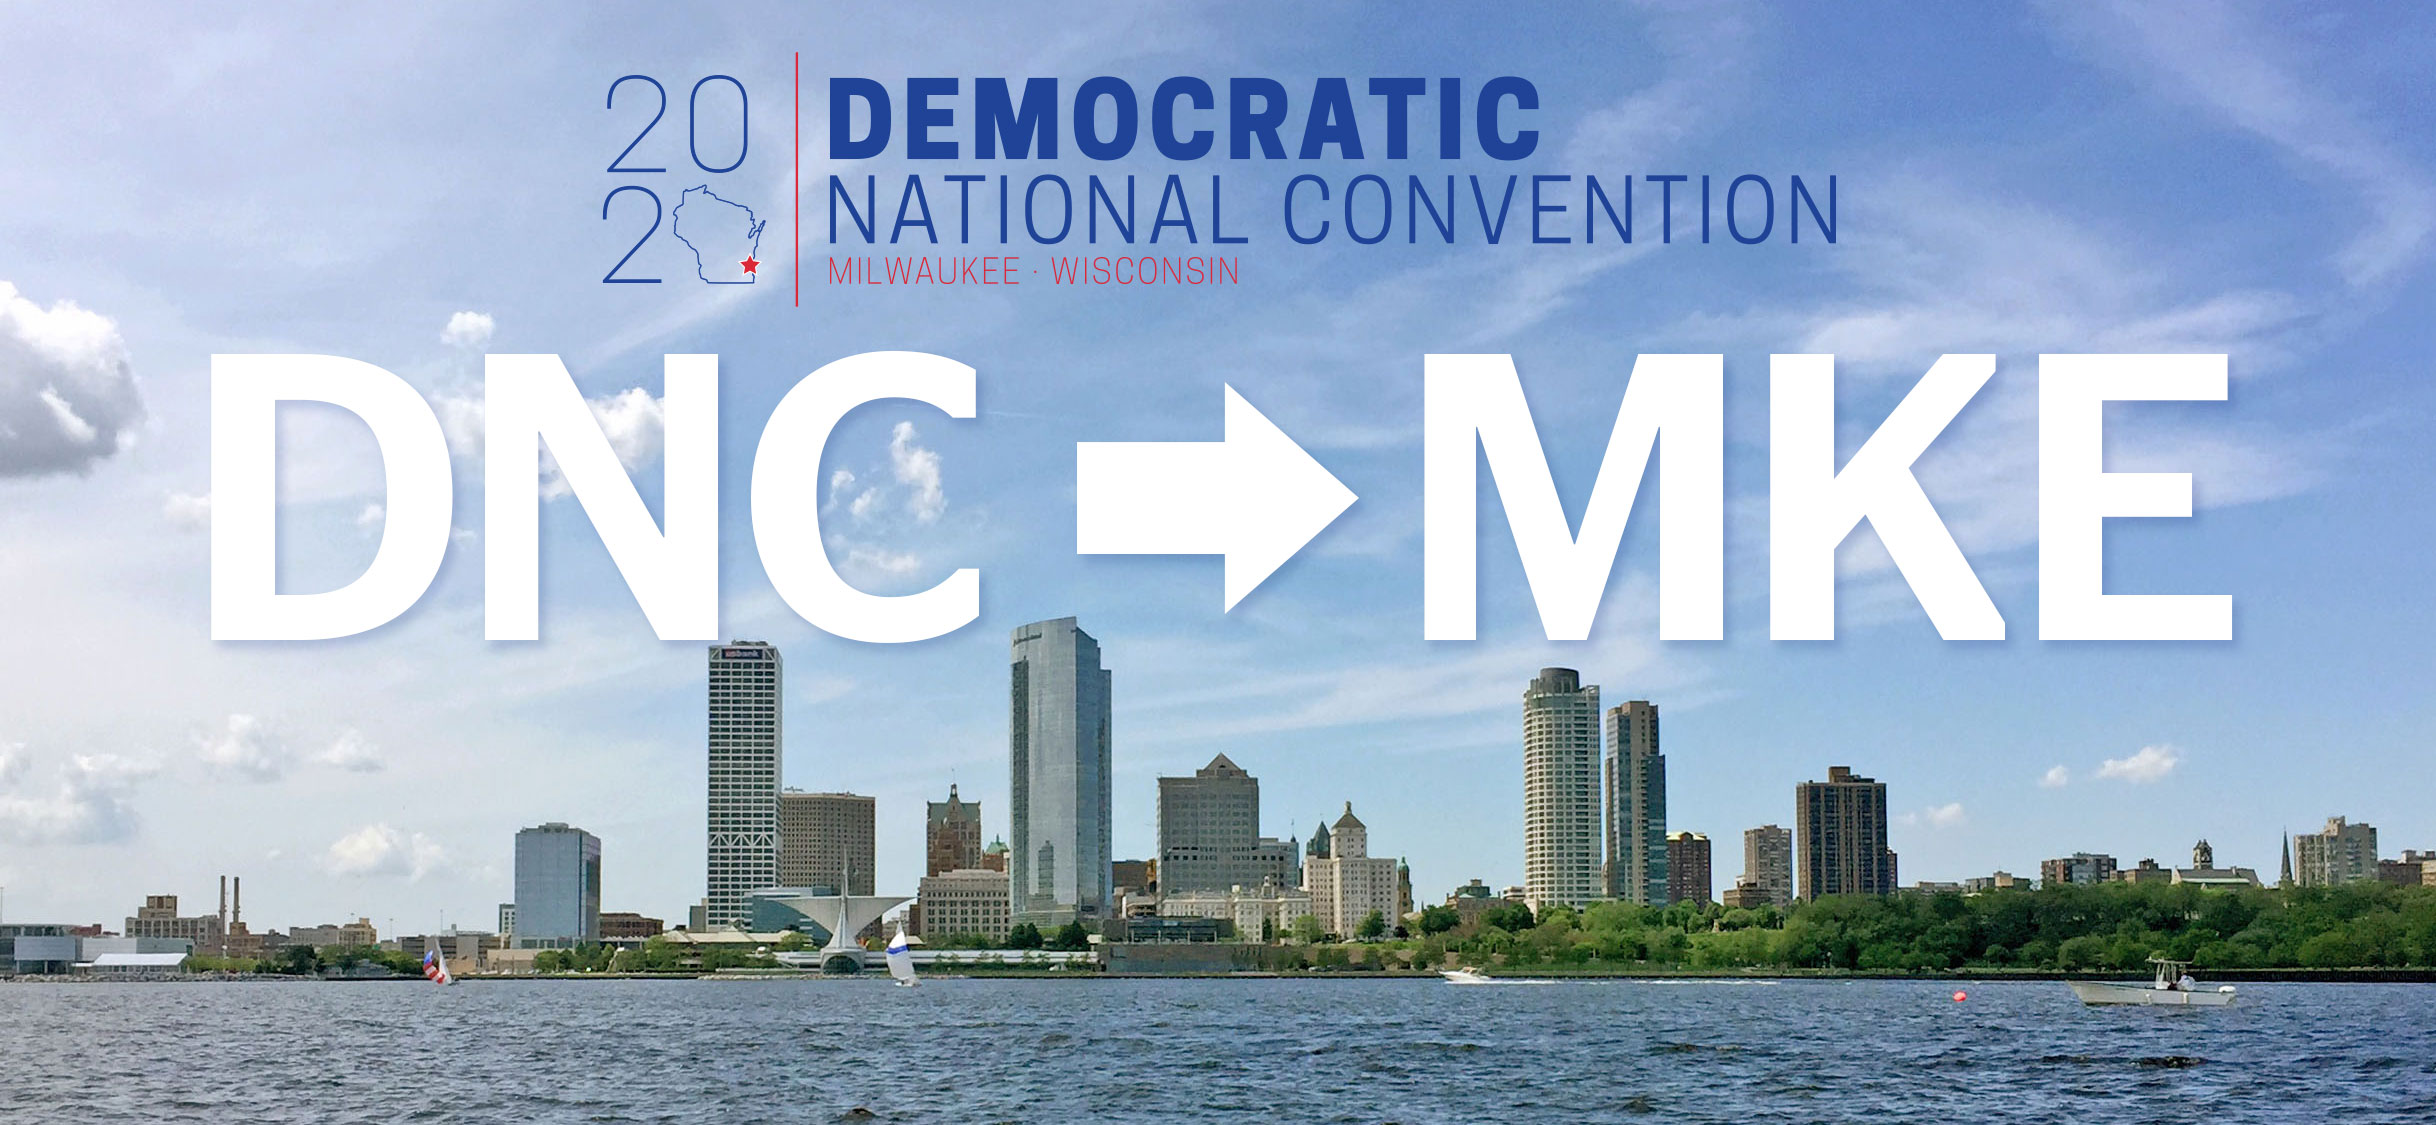 The 2020 Democratic National Convention in Milwaukee